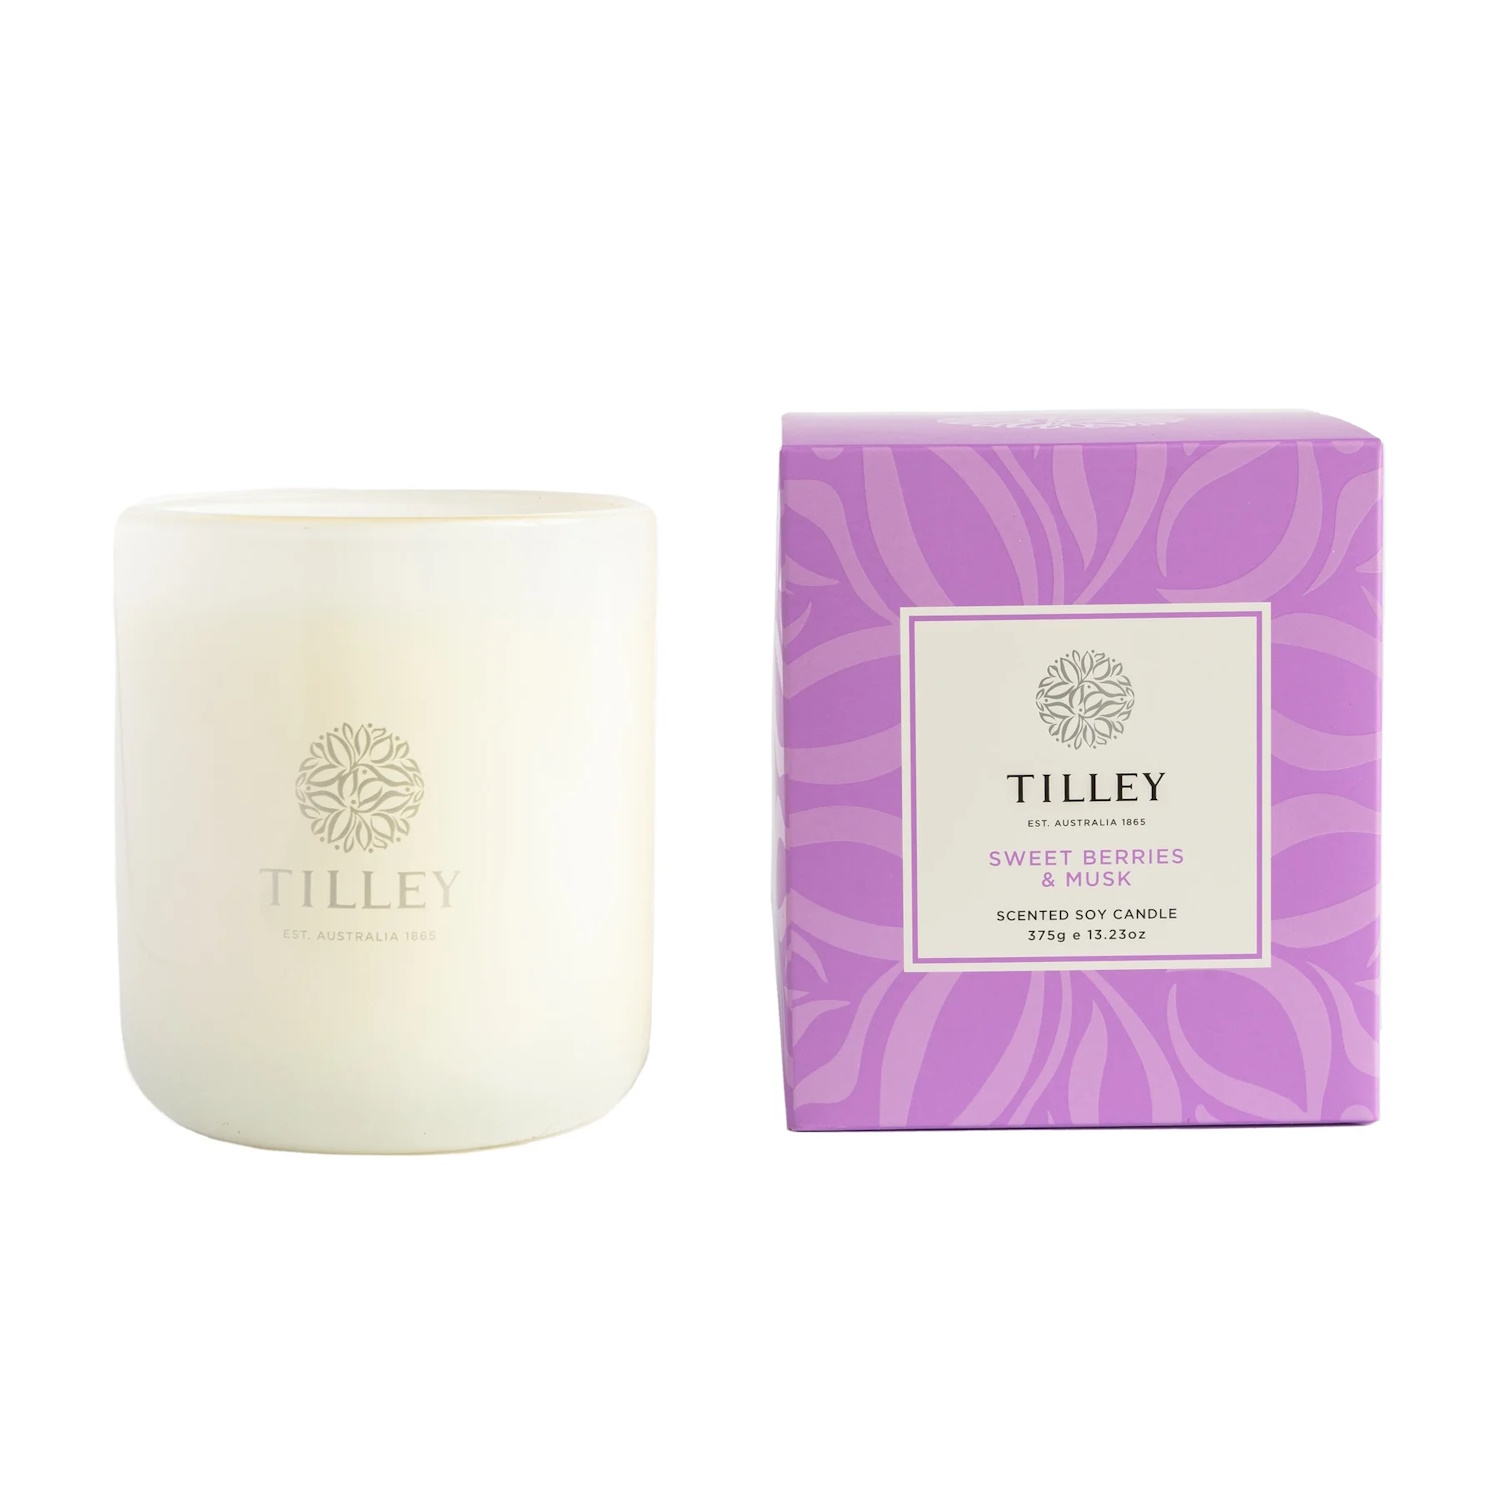 Tilley Classic White Sweet Berries & Musk 375g Soy Candle